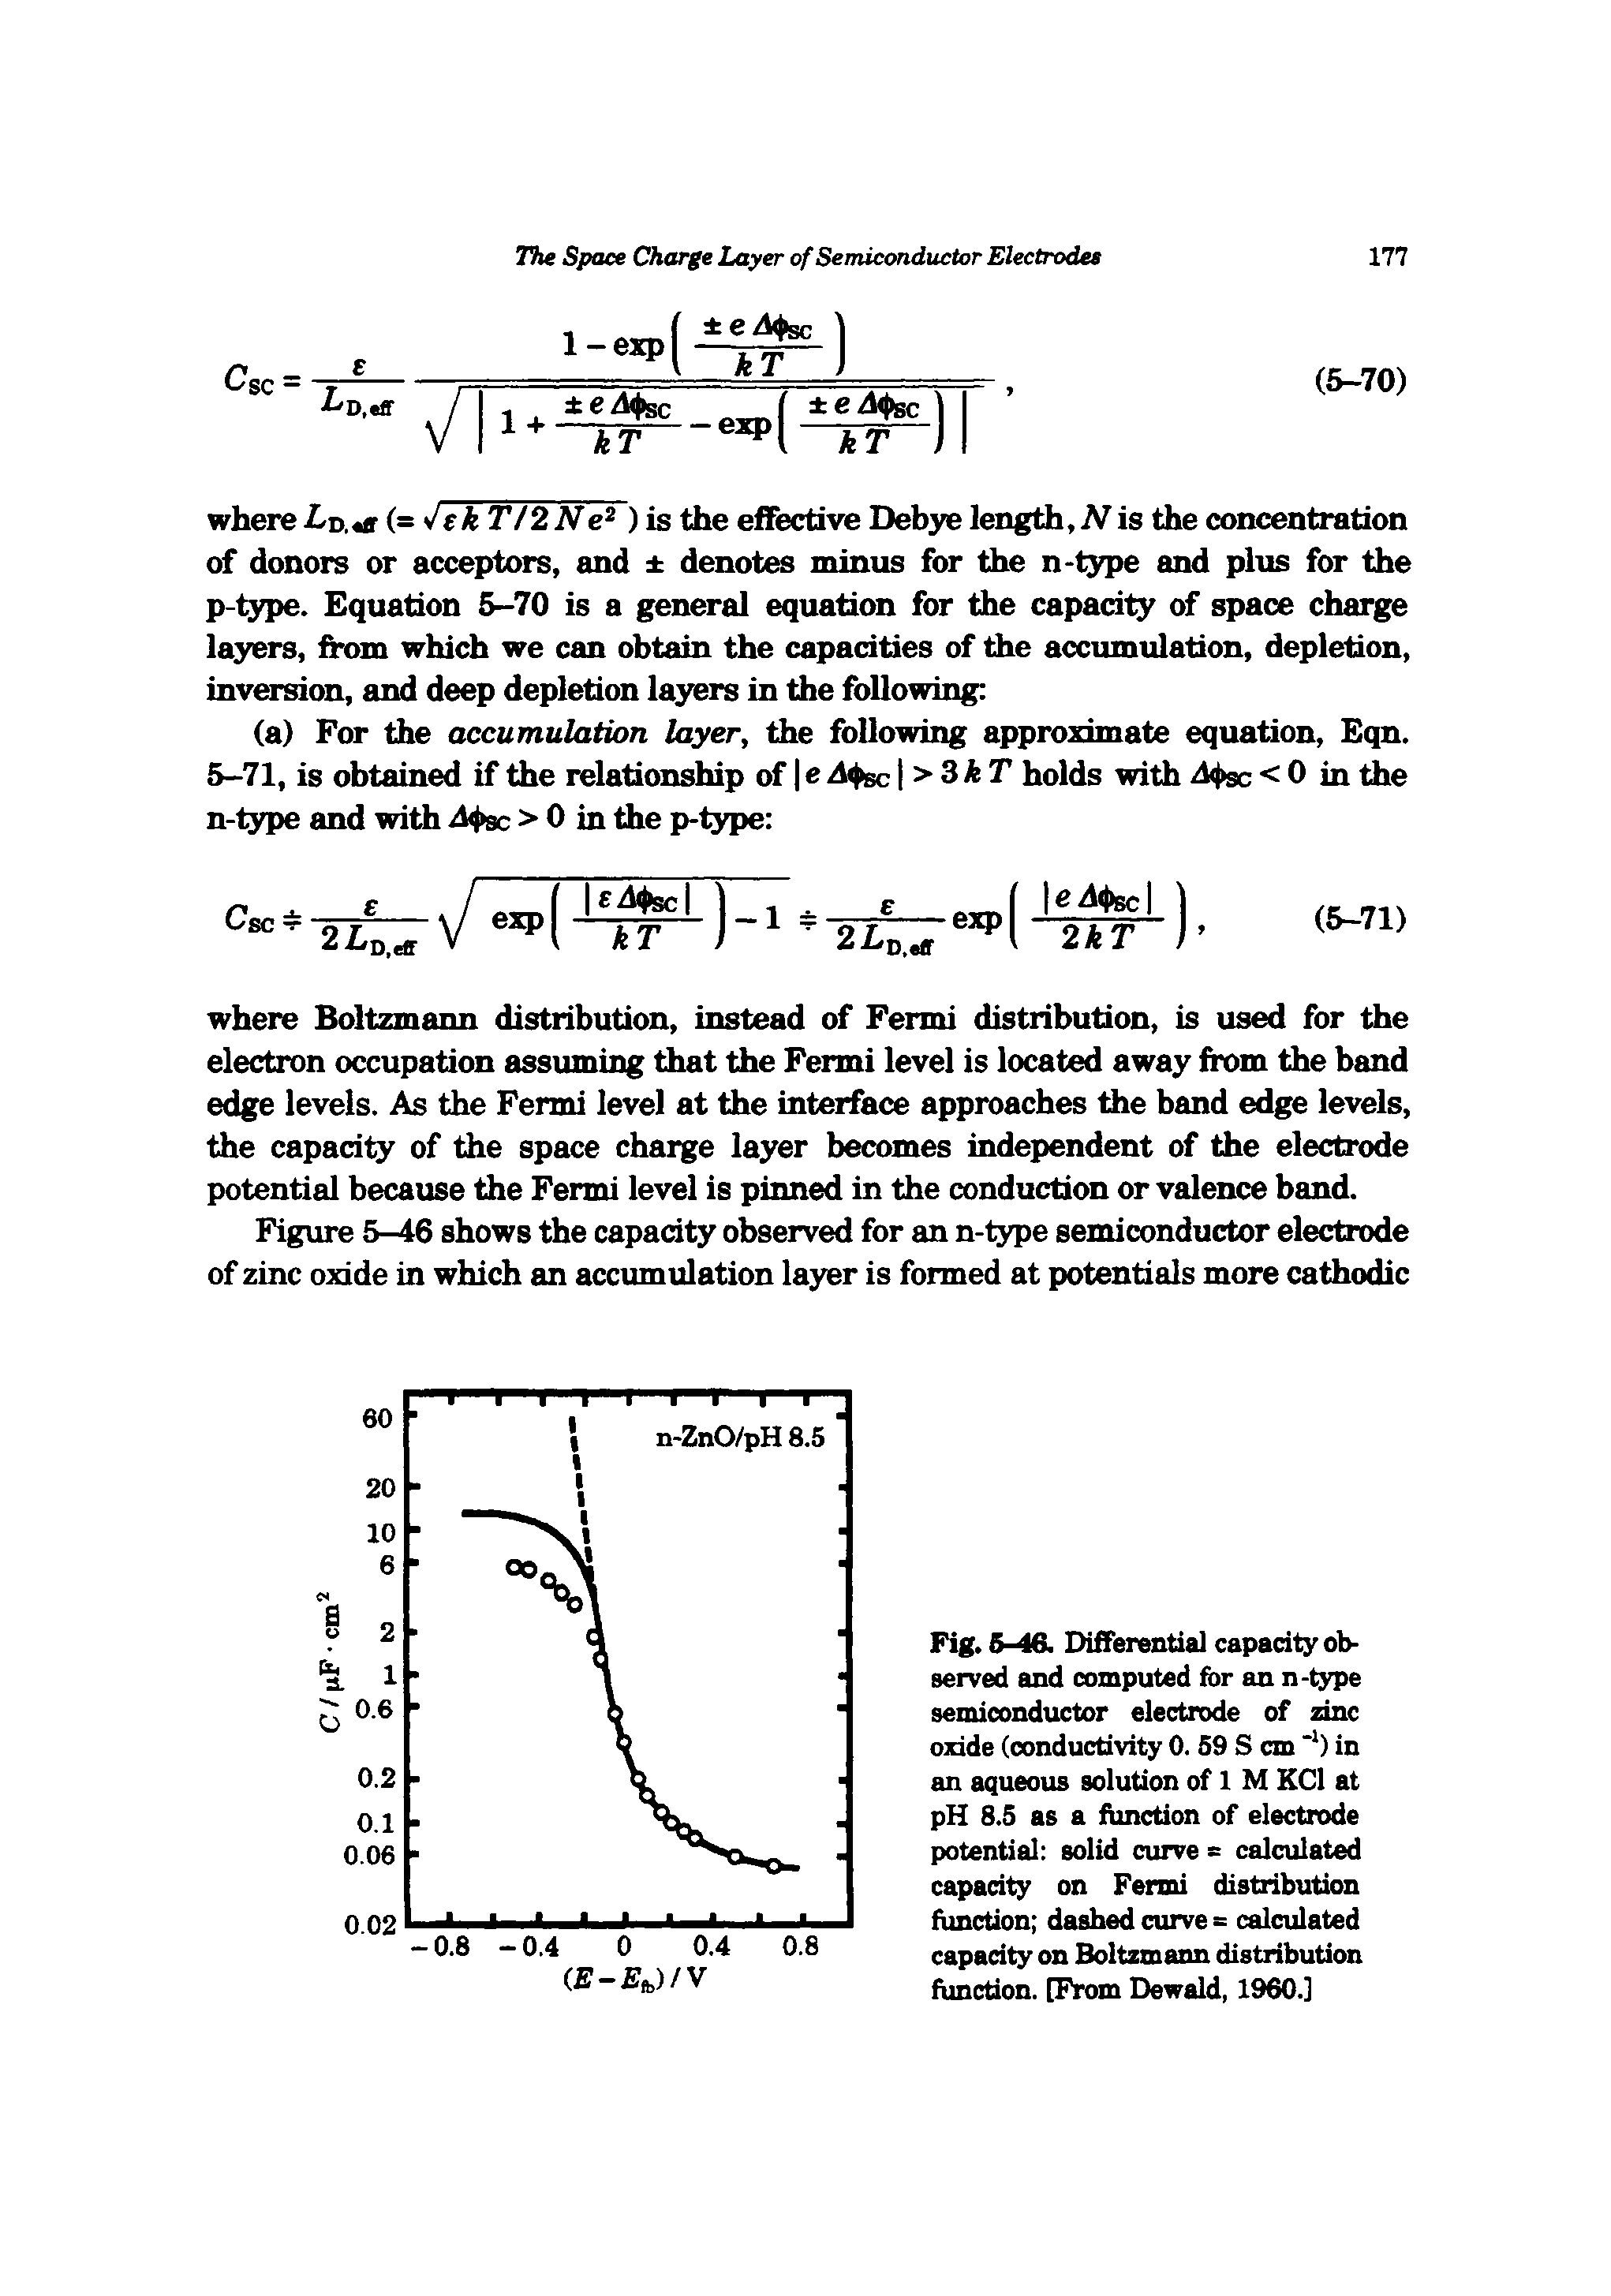 Fig. 6-46. Differential capacity observed and computed for an n-type semiconductor electrode of zinc oxide (conductivity 0. 59 S cm in an aqueous solution of 1 M KCl at pH 8.5 as a function of electrode potential solid curve s calculated capacity on Fermi distribution fimction dashed curve = calculated capacity on Boltzmann distribution function. [From Dewald, I960.]...